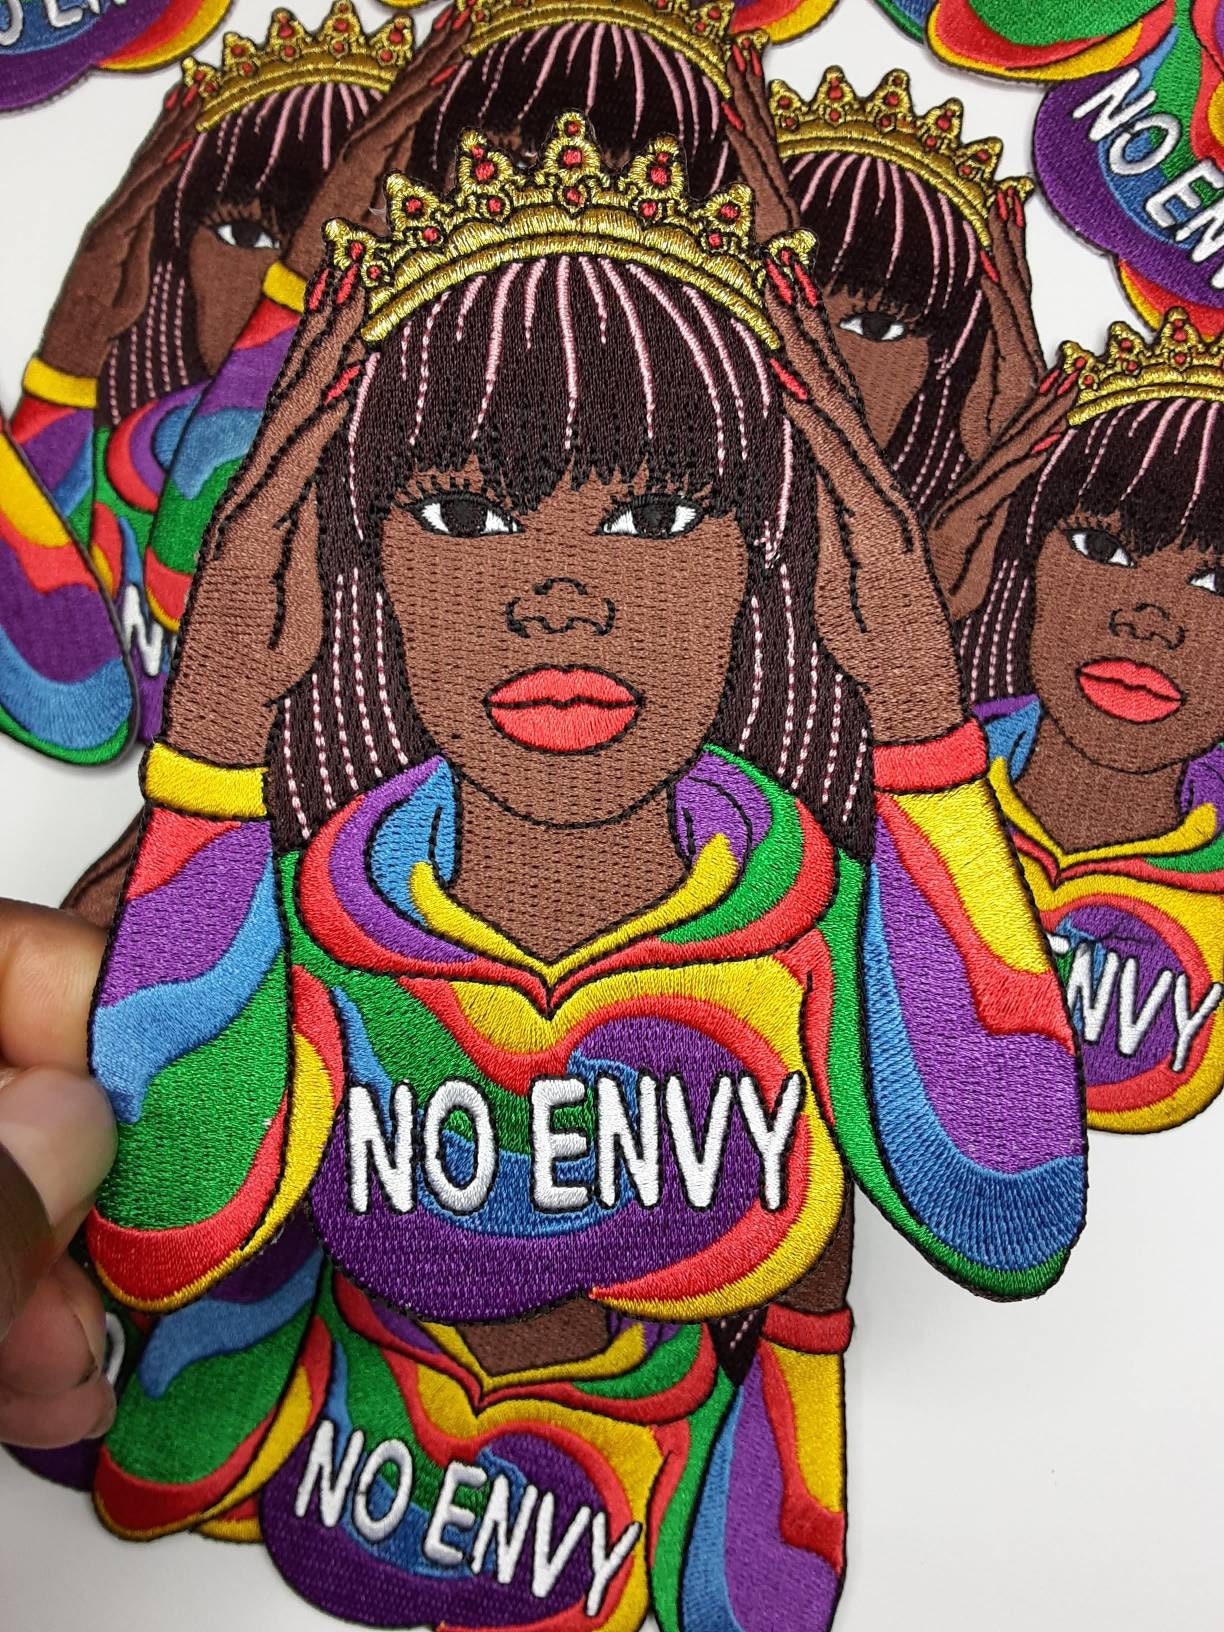 Crowned Diva "No Envy" with Tie-dyed Hoodie, Iron or Sew-on Embroidered 3D Afrocentric Patch, Exclusive Appliques, Size 4.5"